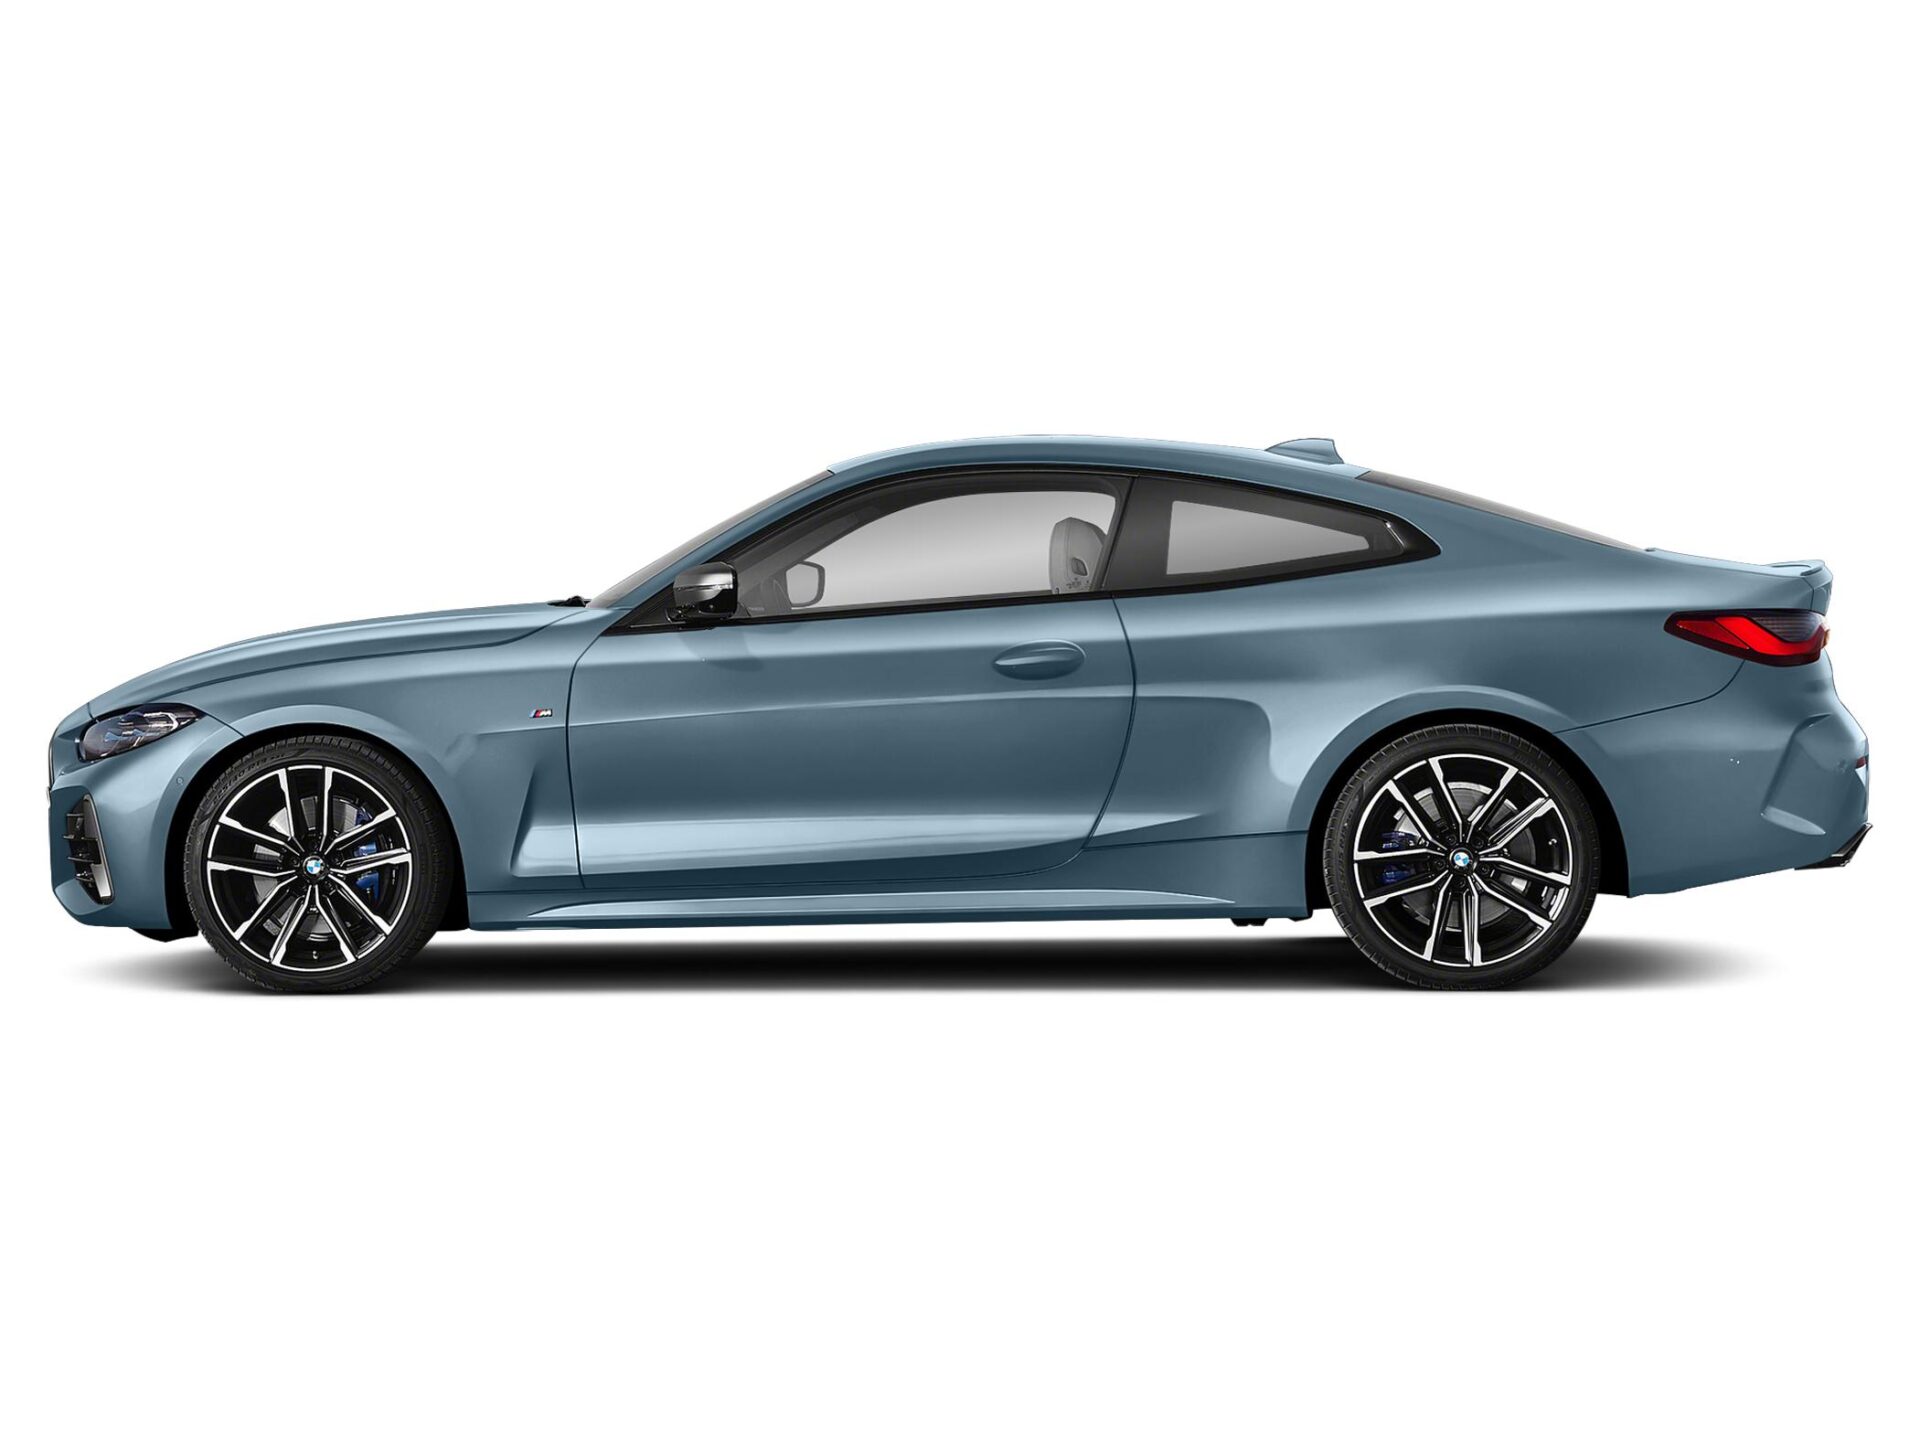 BMW M440i Coupe Lease NYC Brooklyn Queens Bronx Staten Island VIP Best